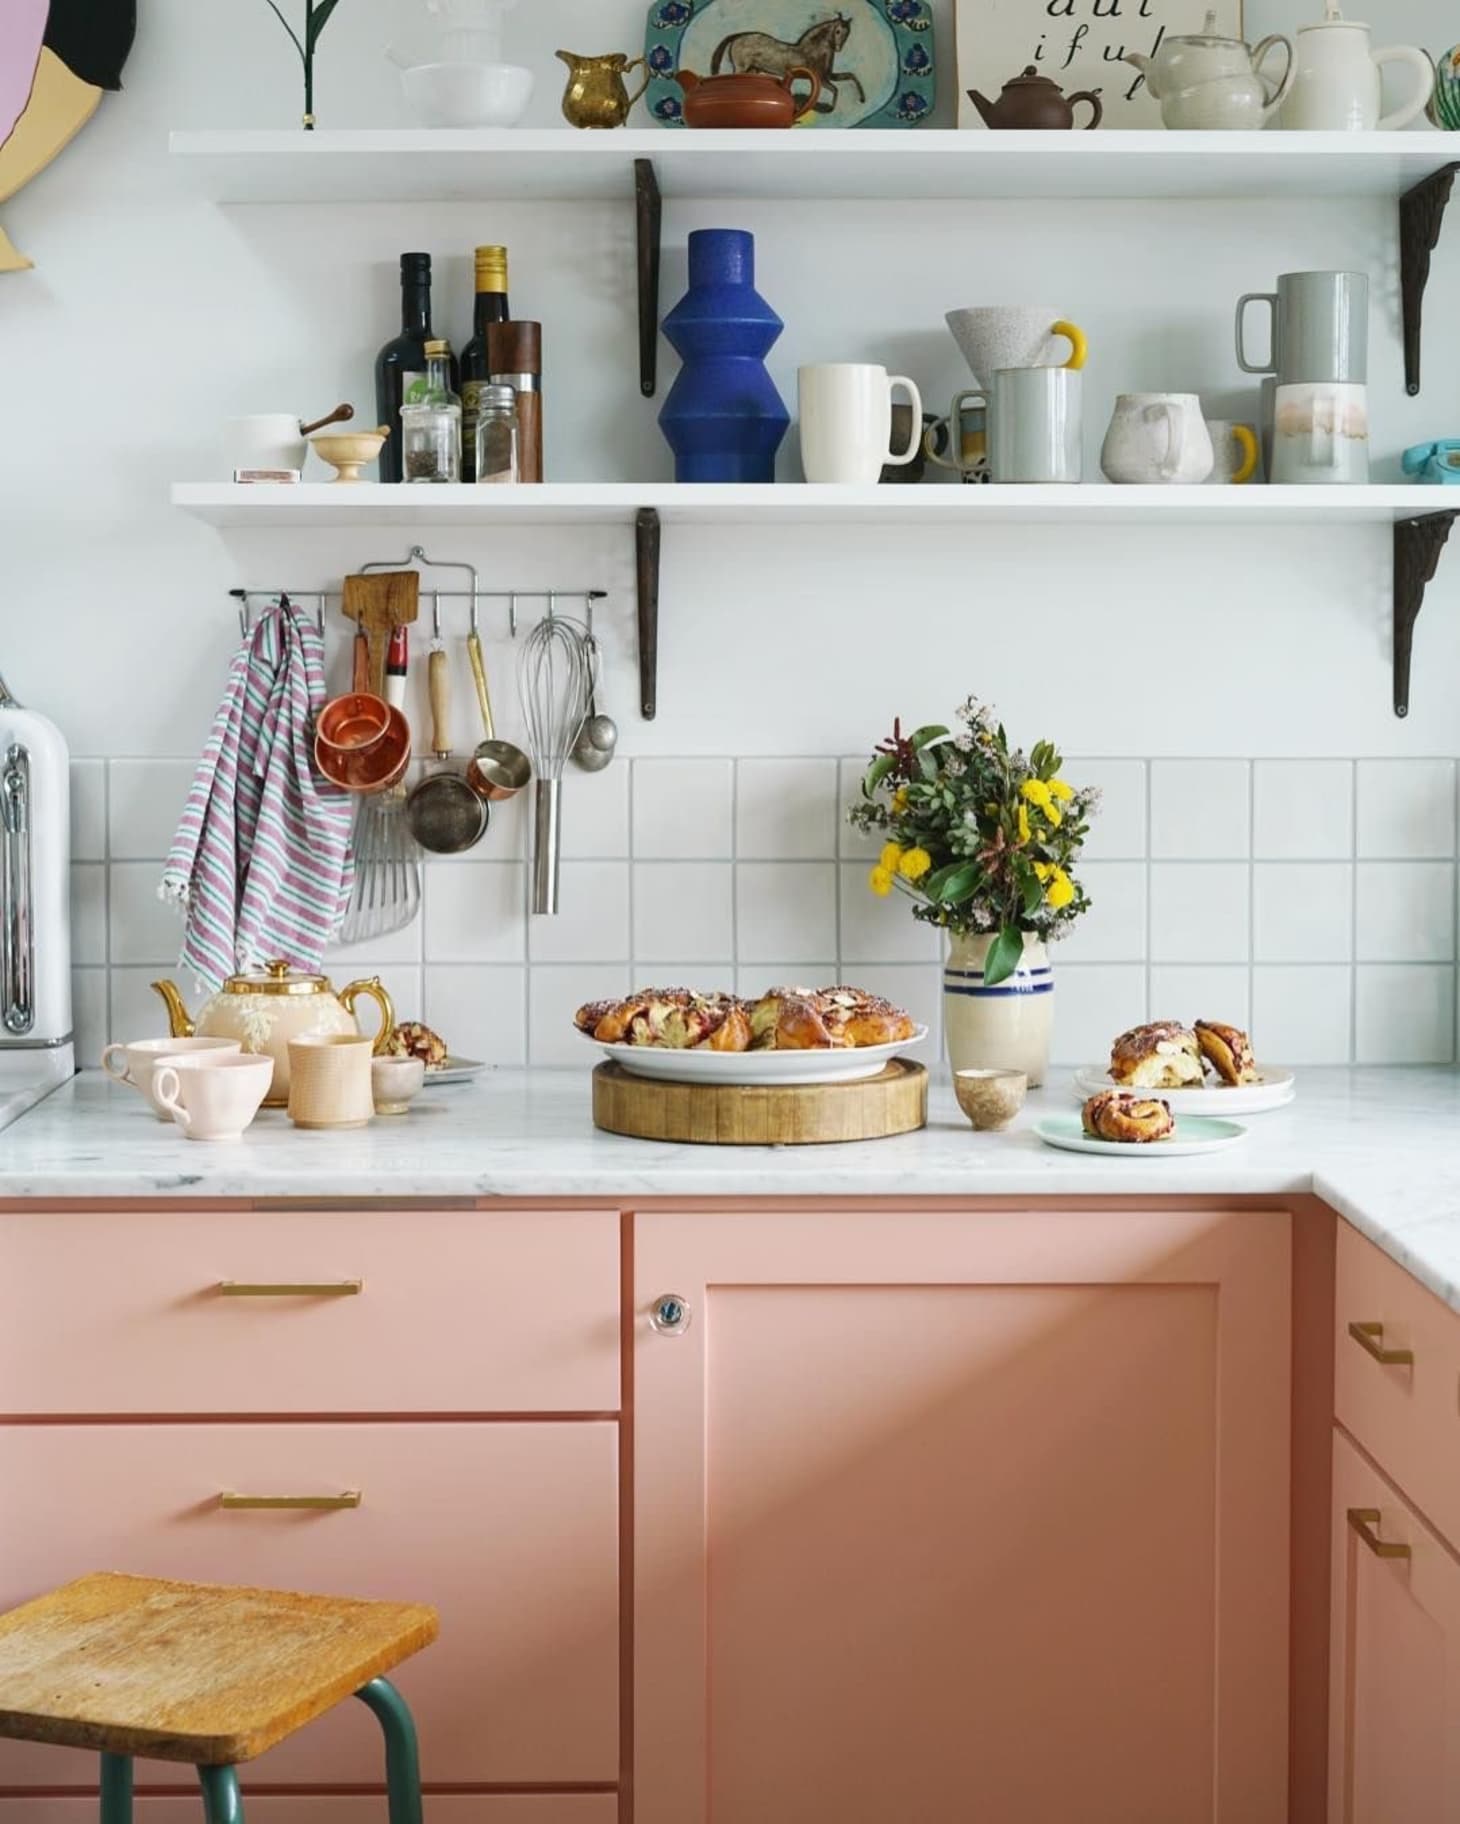 12 Perfectly Pink Kitchens That Knock It Out of the Park